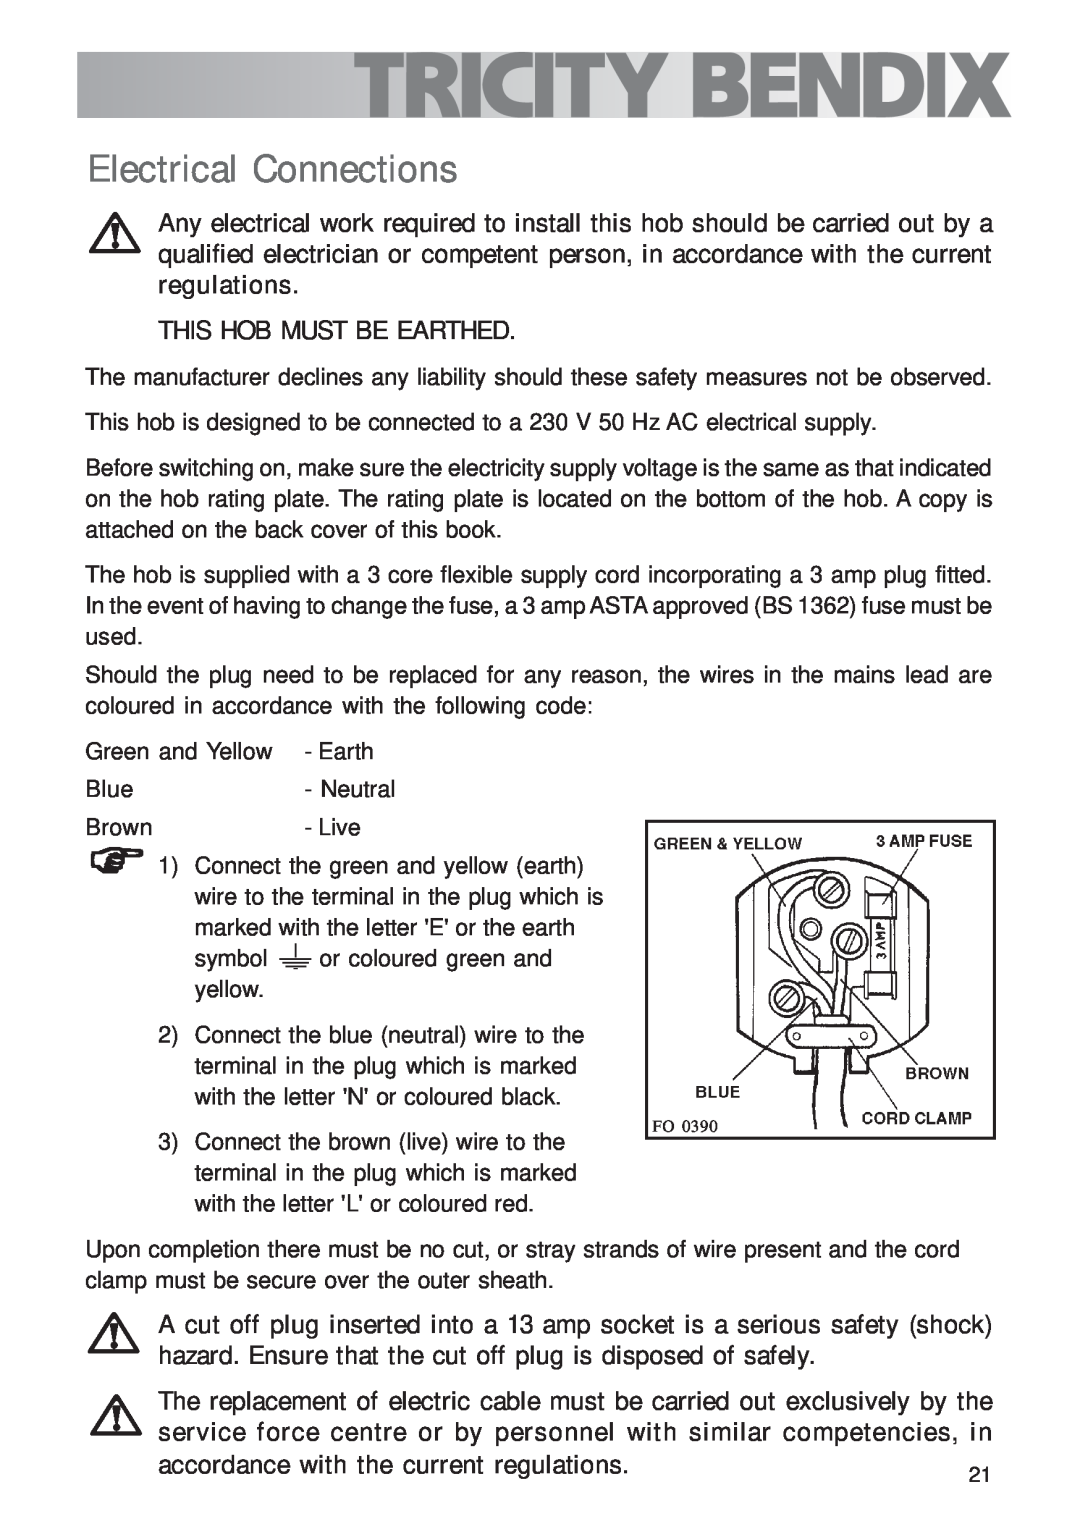 Tricity Bendix TBG700 user manual Electrical Connections, This Hob Must Be Earthed, accordance with the current regulations 